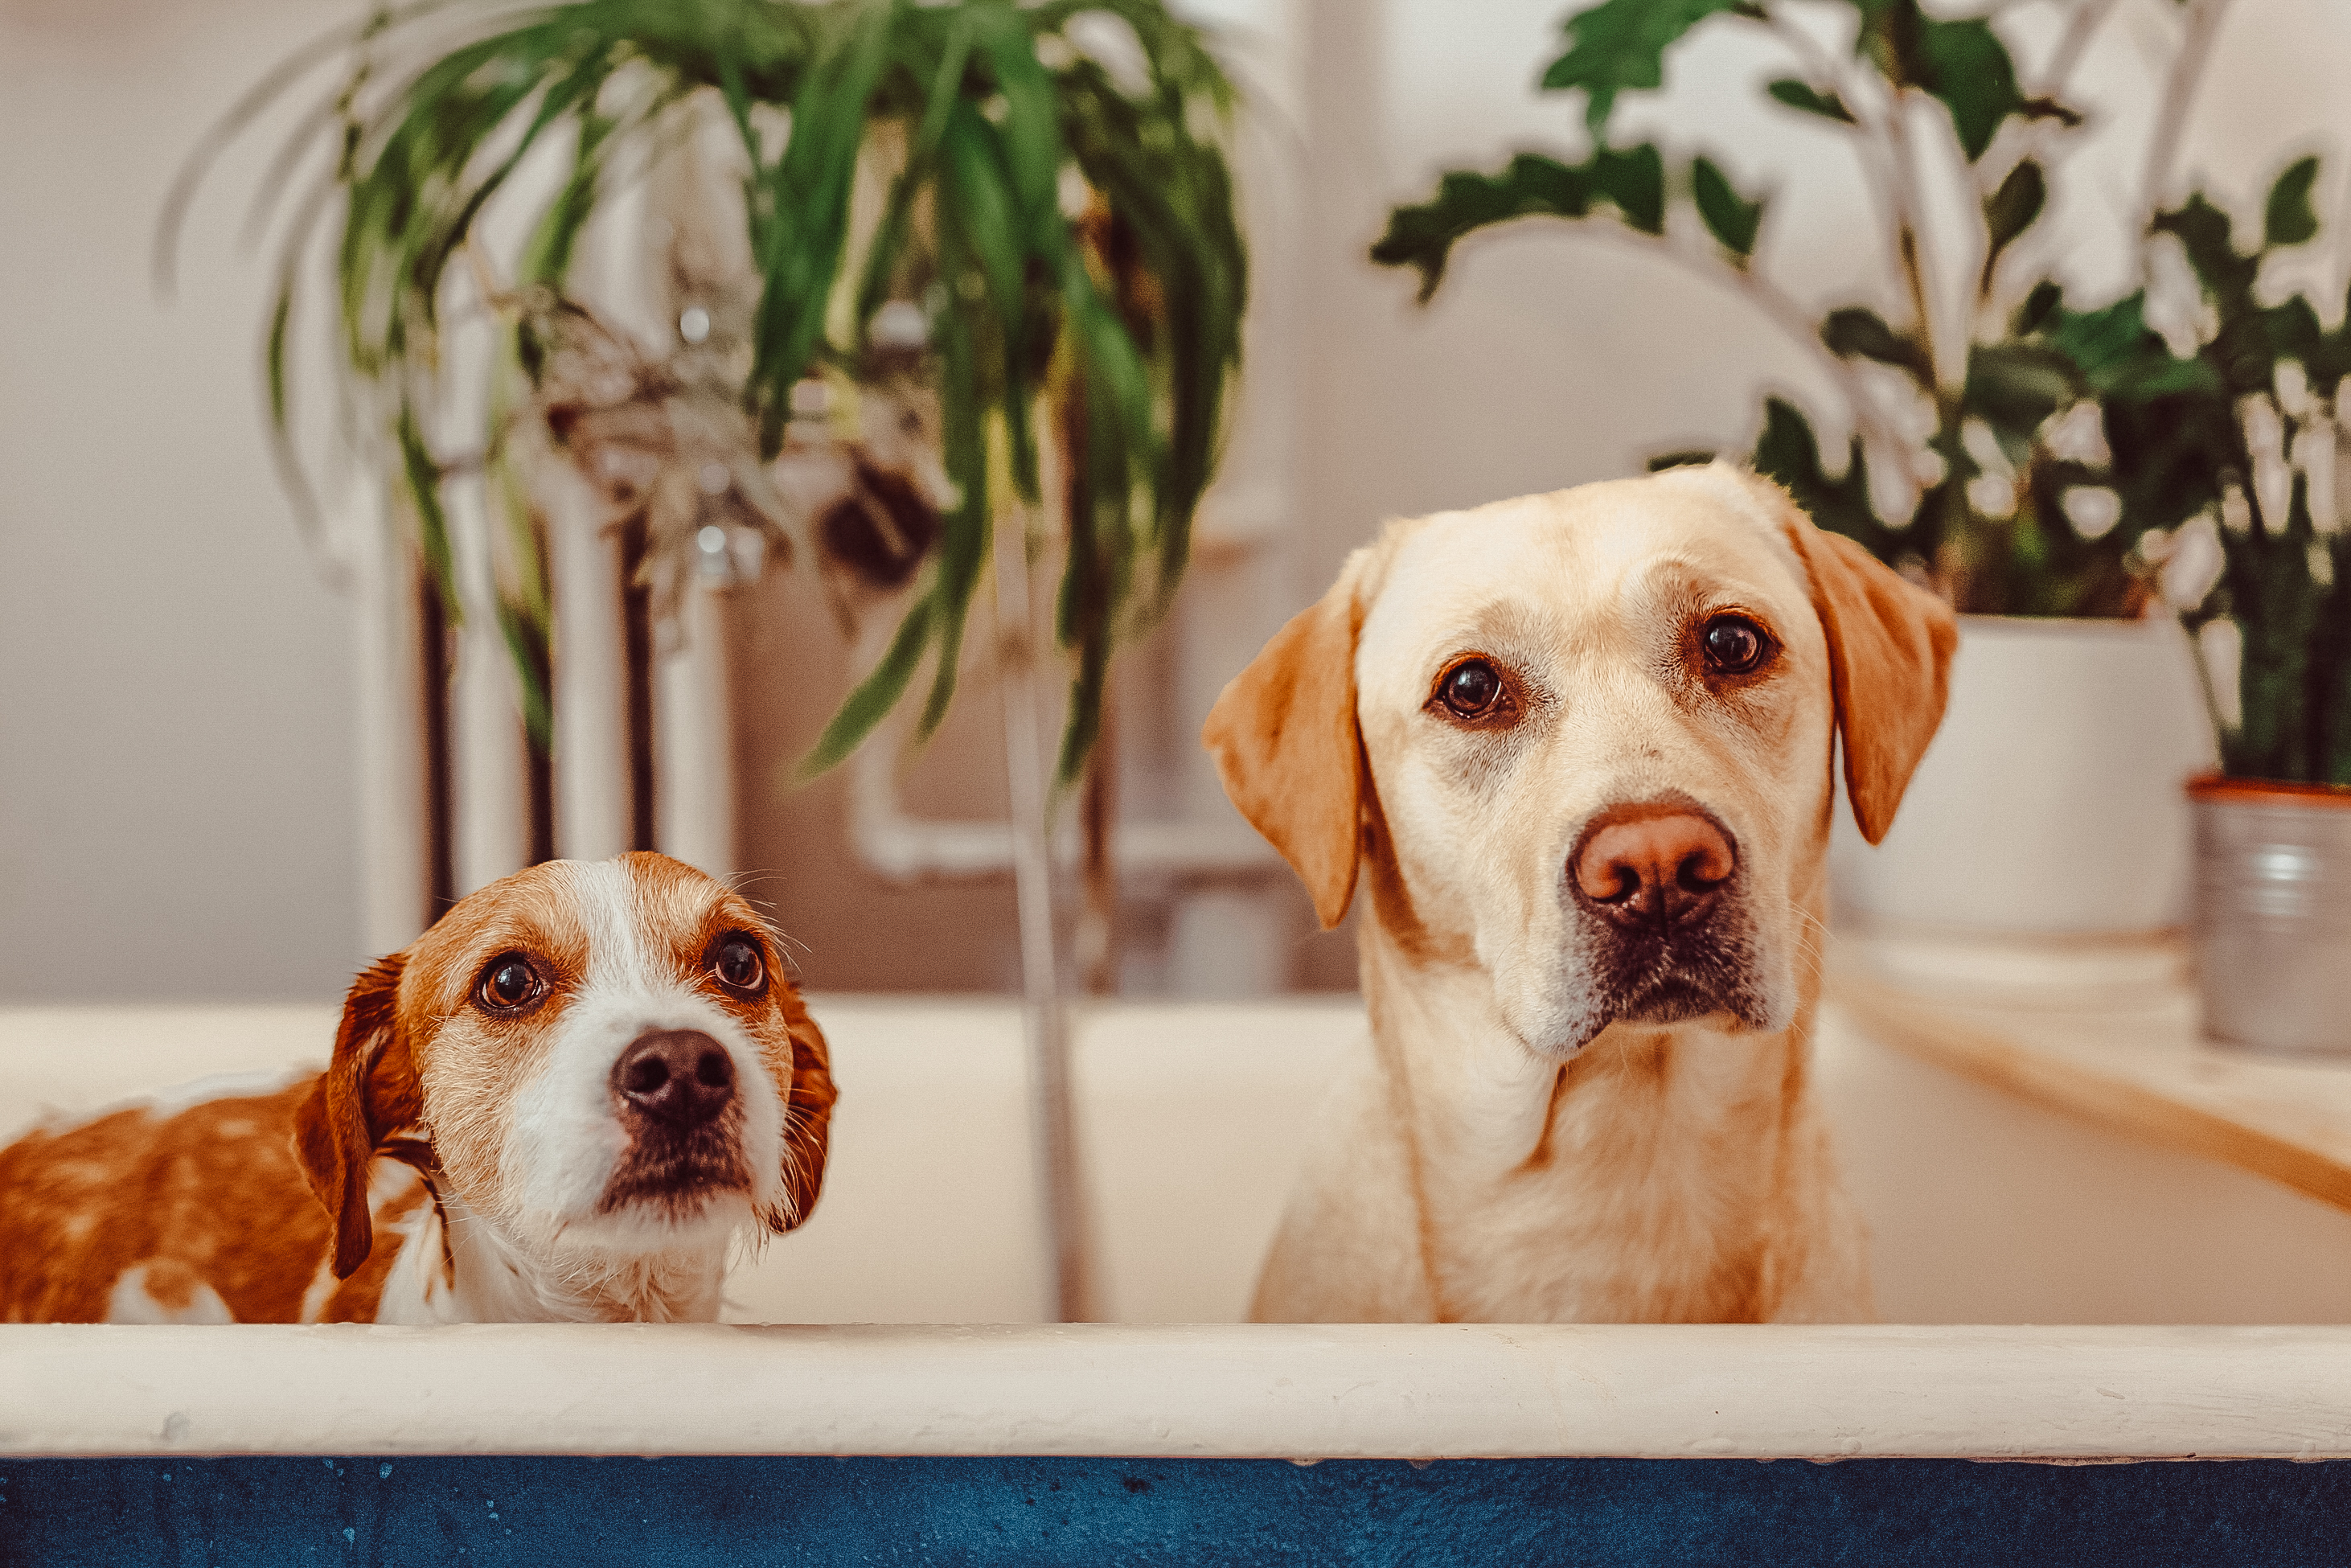 Two dogs bathing in the bathroom in blue tub.